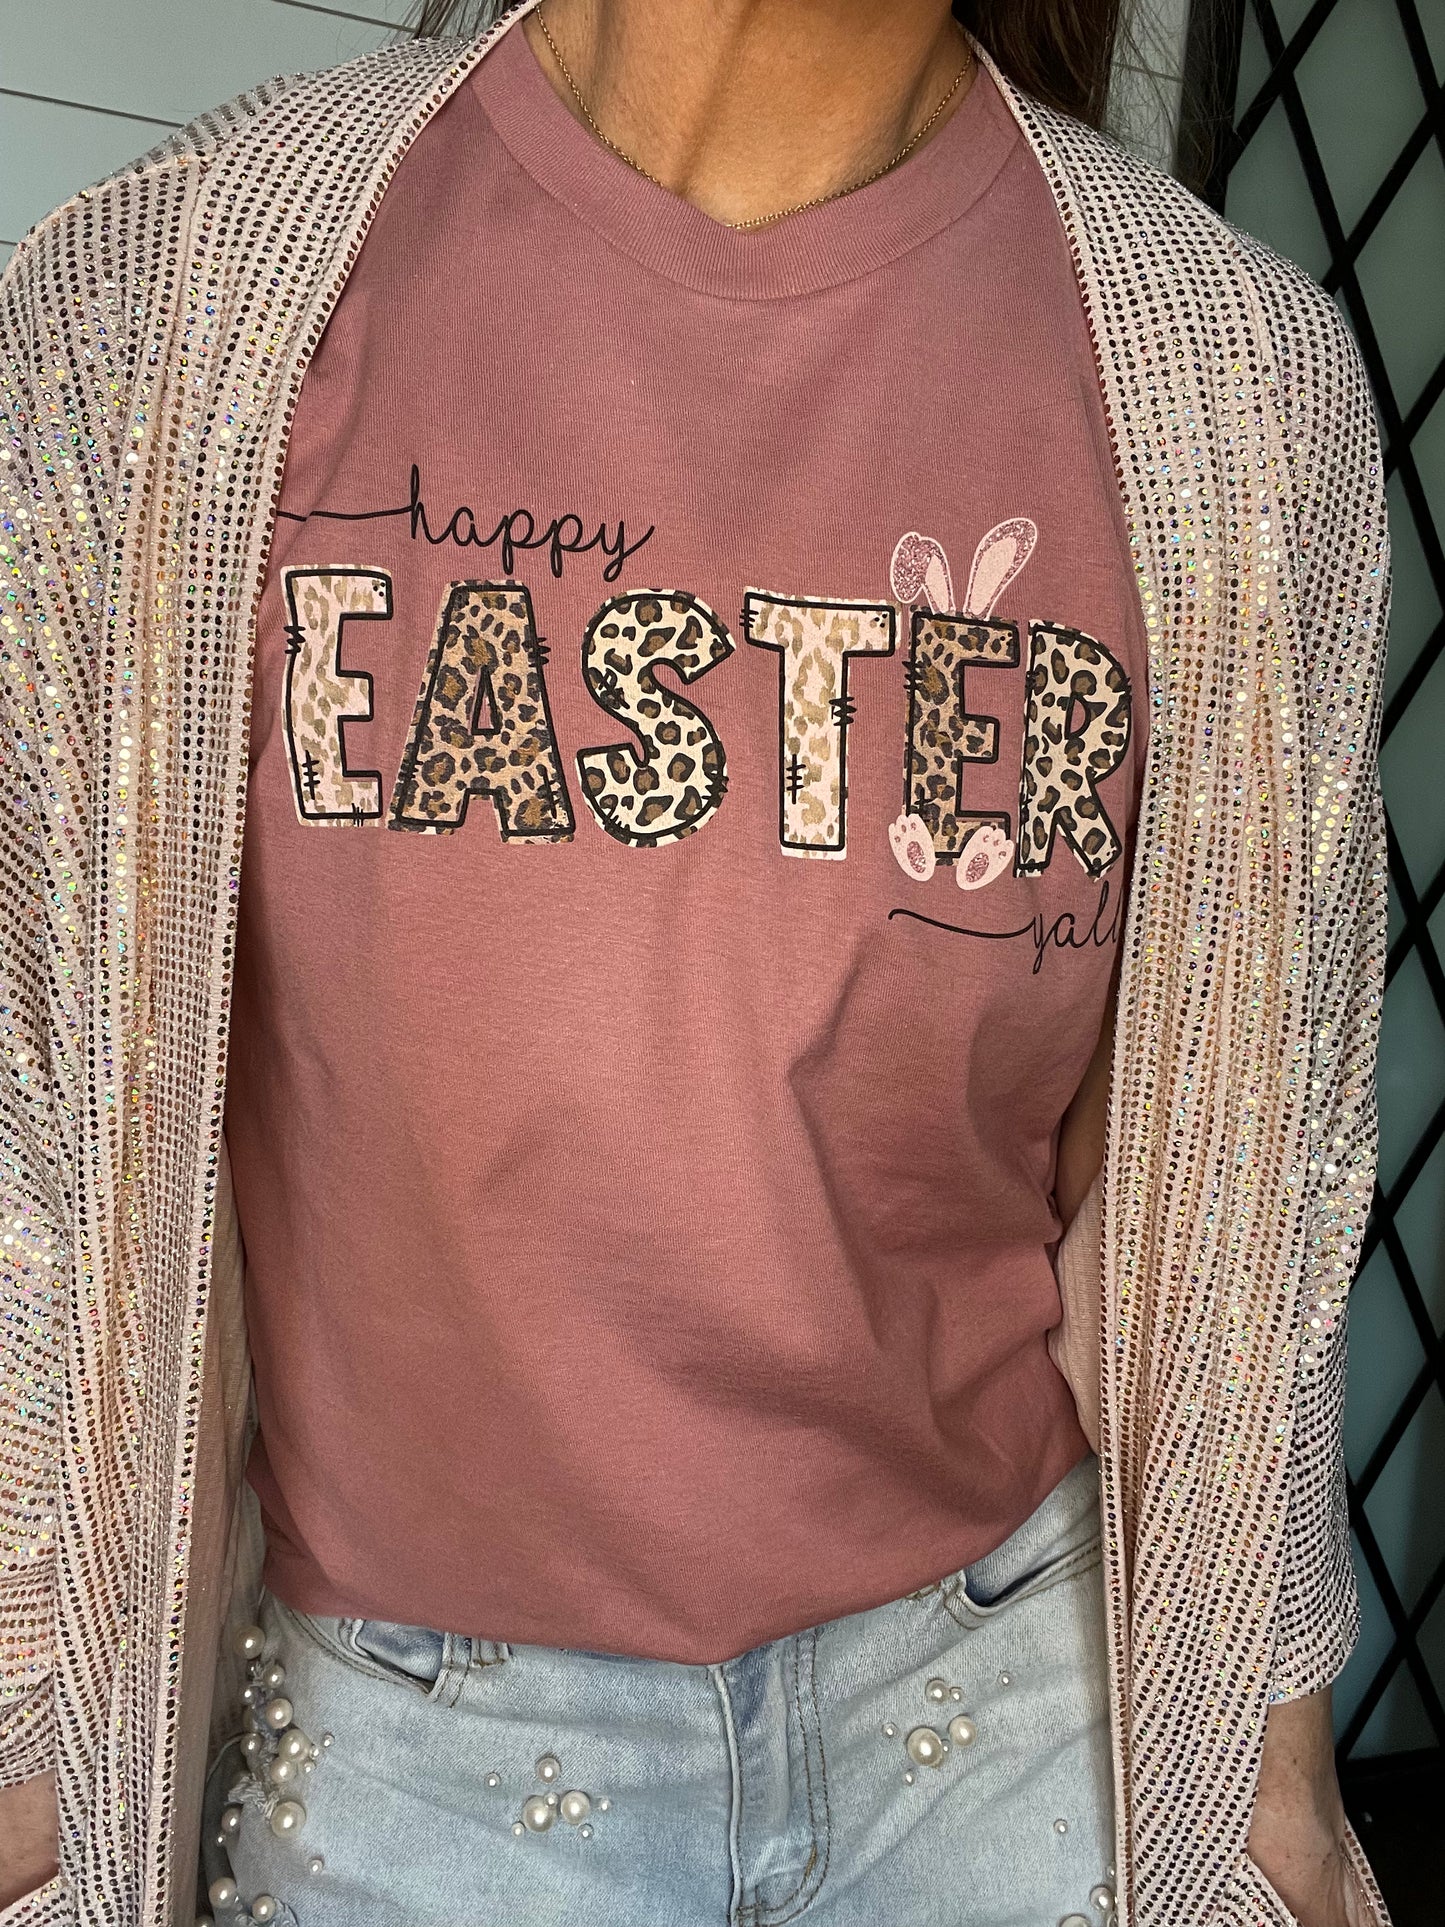 Happy Easter Y'all Graphic Tee 25% Off at Checkout